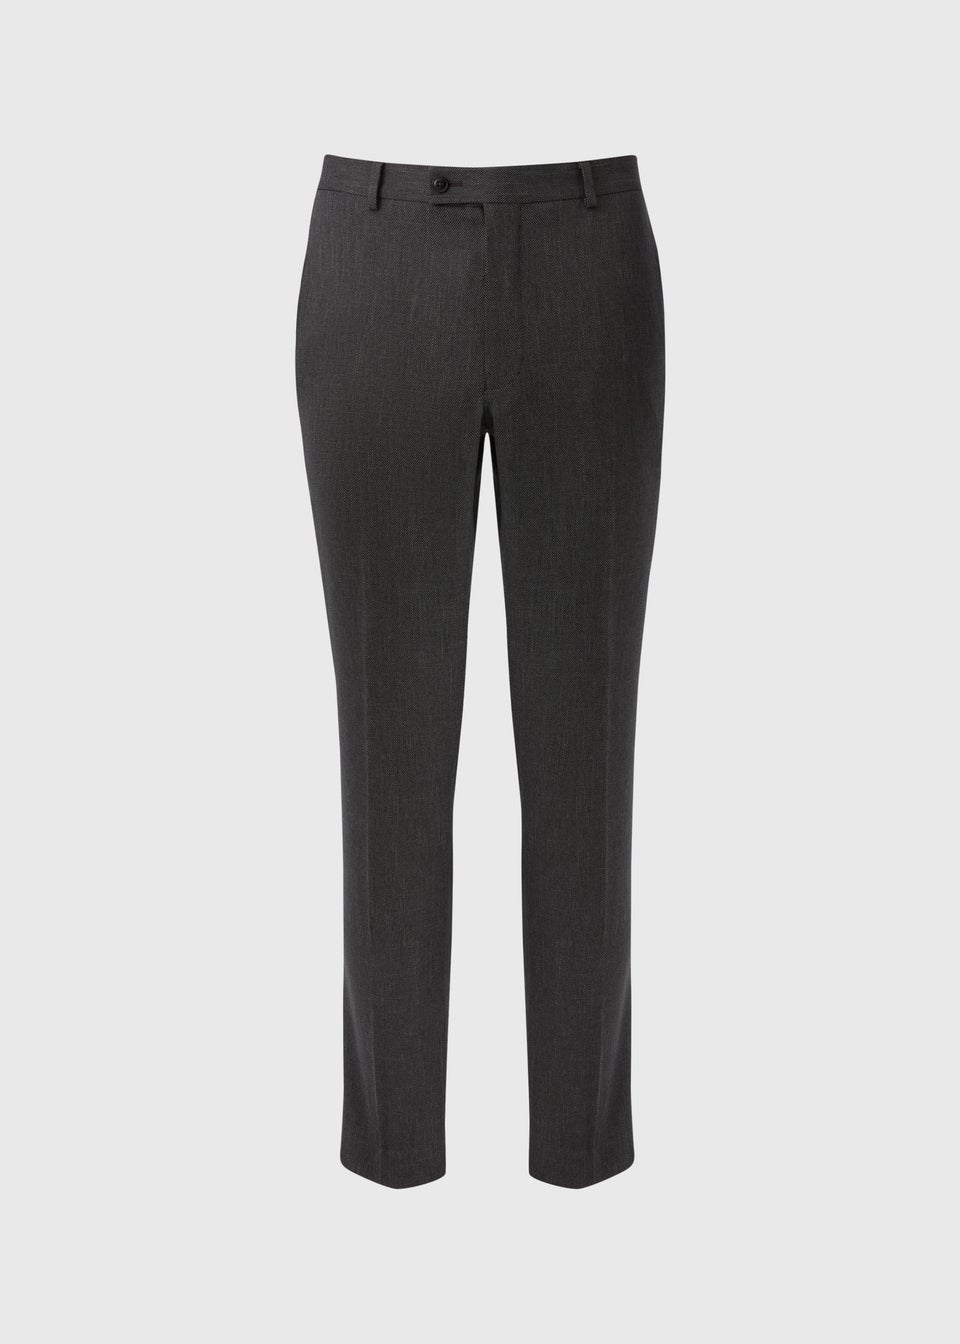 Taylor & Wright Charcoal Albert Tailored Fit Trousers